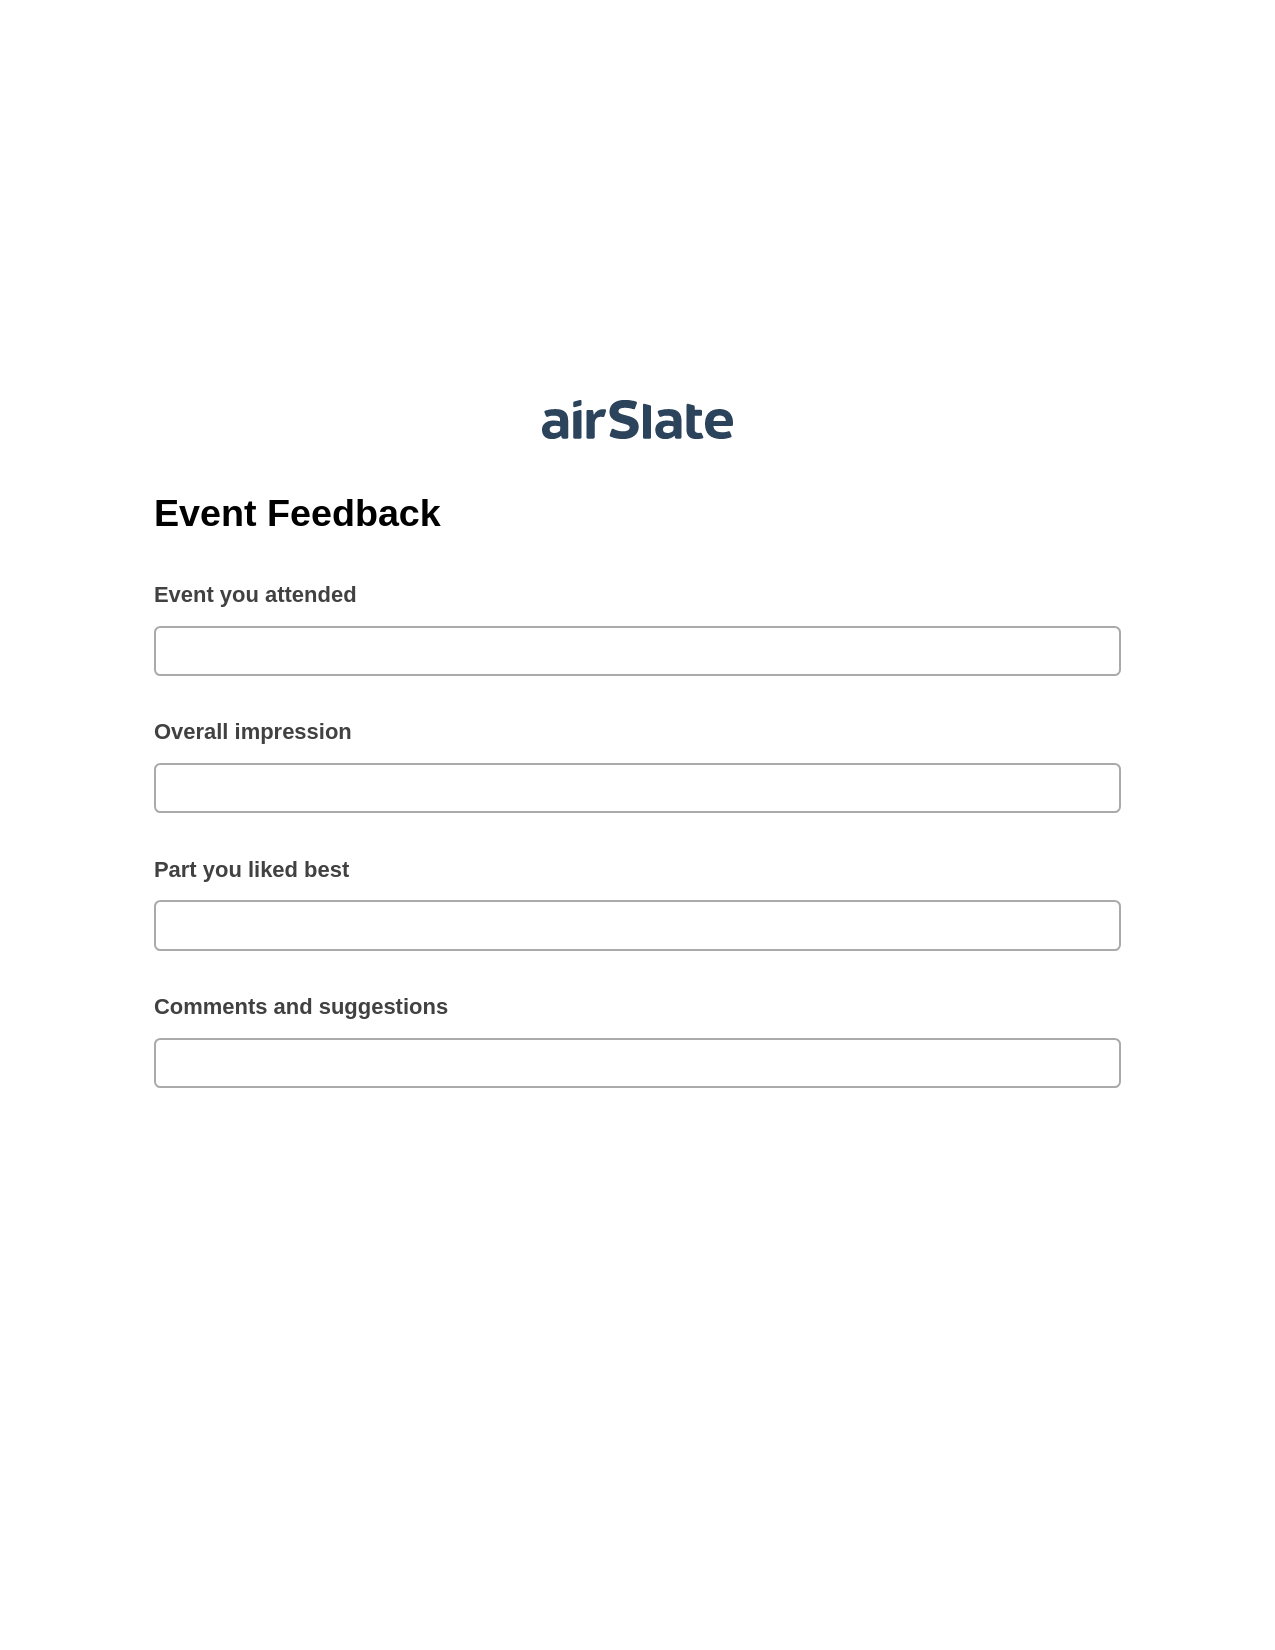 Event Feedback Pre-fill Slate from MS Dynamics 365 Records Bot, Assign Slate Name Bot, Archive to SharePoint Folder Bot